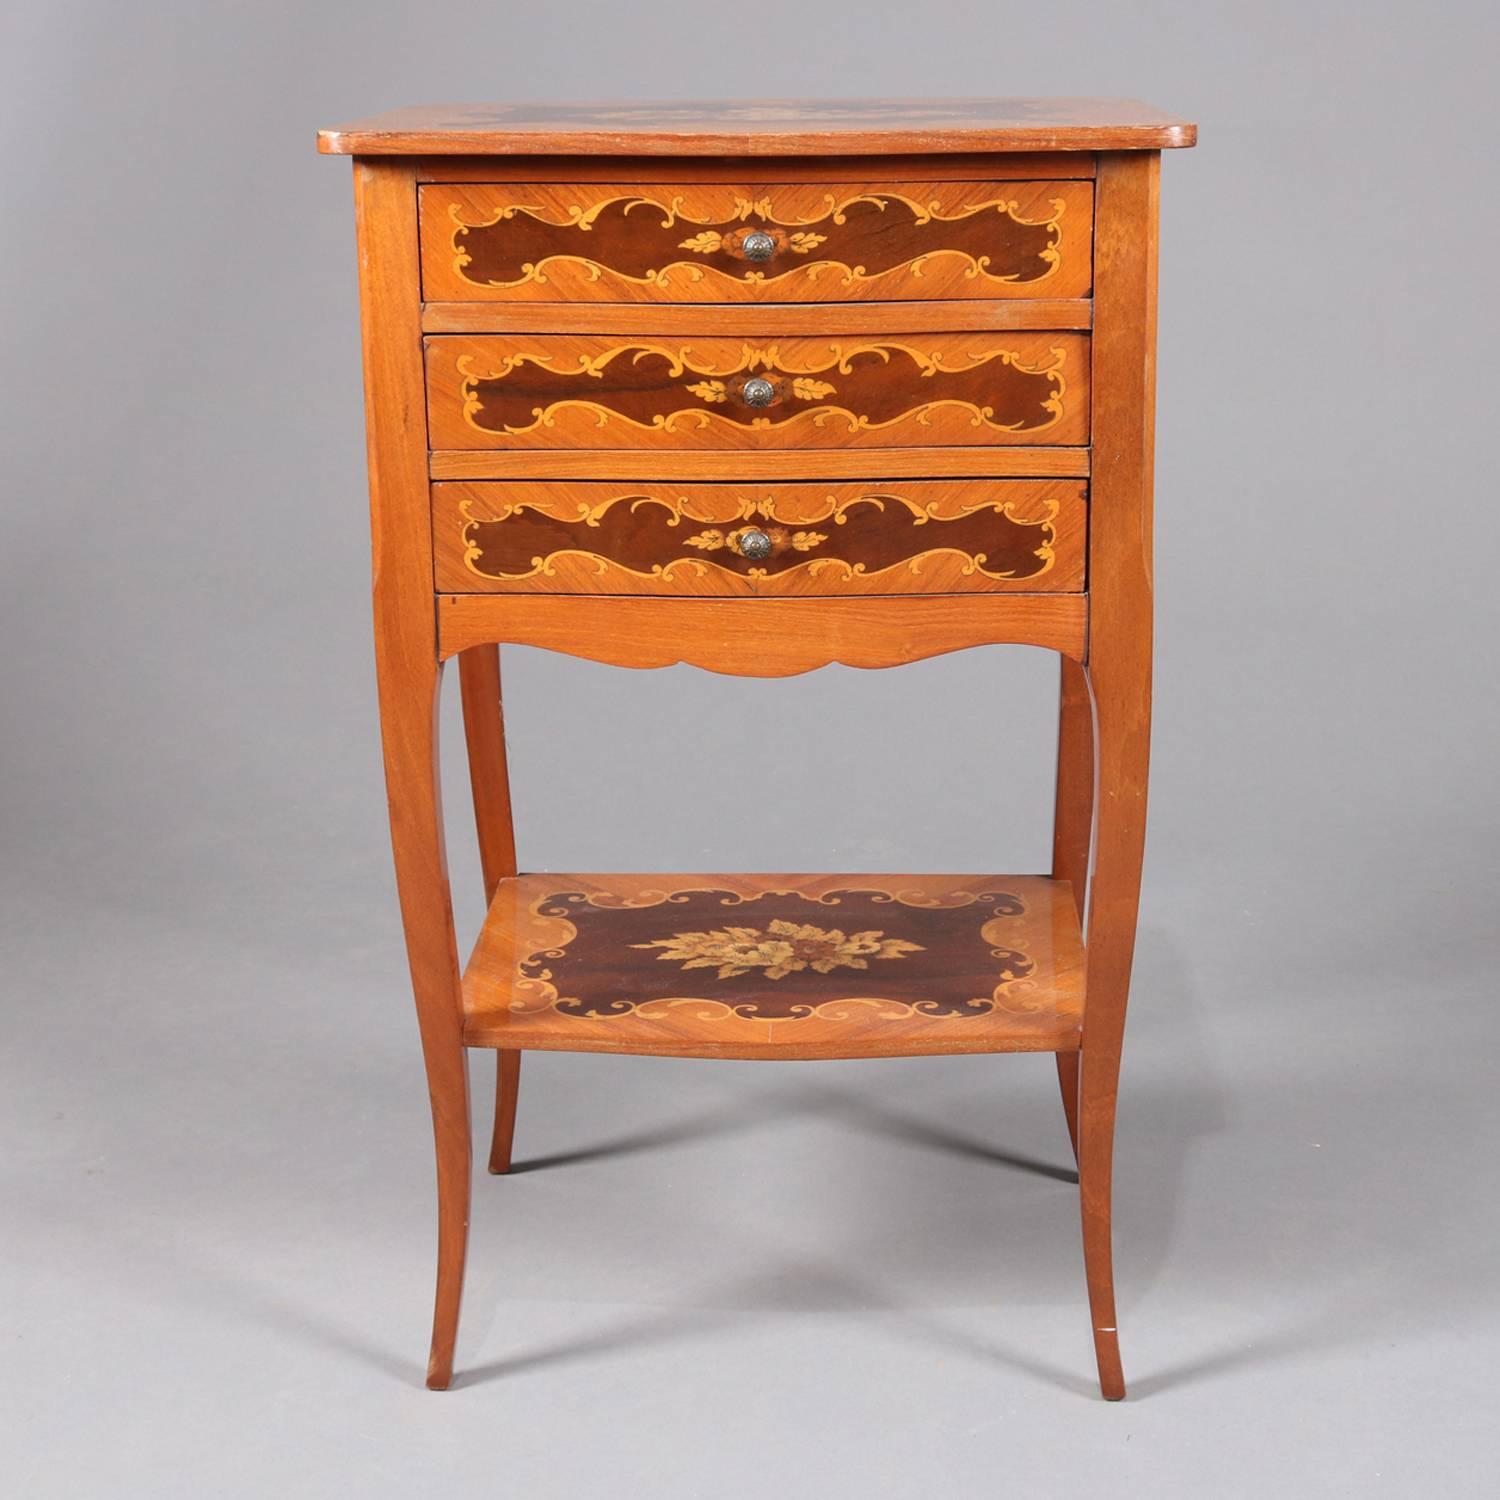 Floral Louis XV style kingwood stand features reserves of floral and scroll inlay marquetry with three drawers, lower shelf and raised on tapered cabriole legs, 20th century.

Measures: 27.5